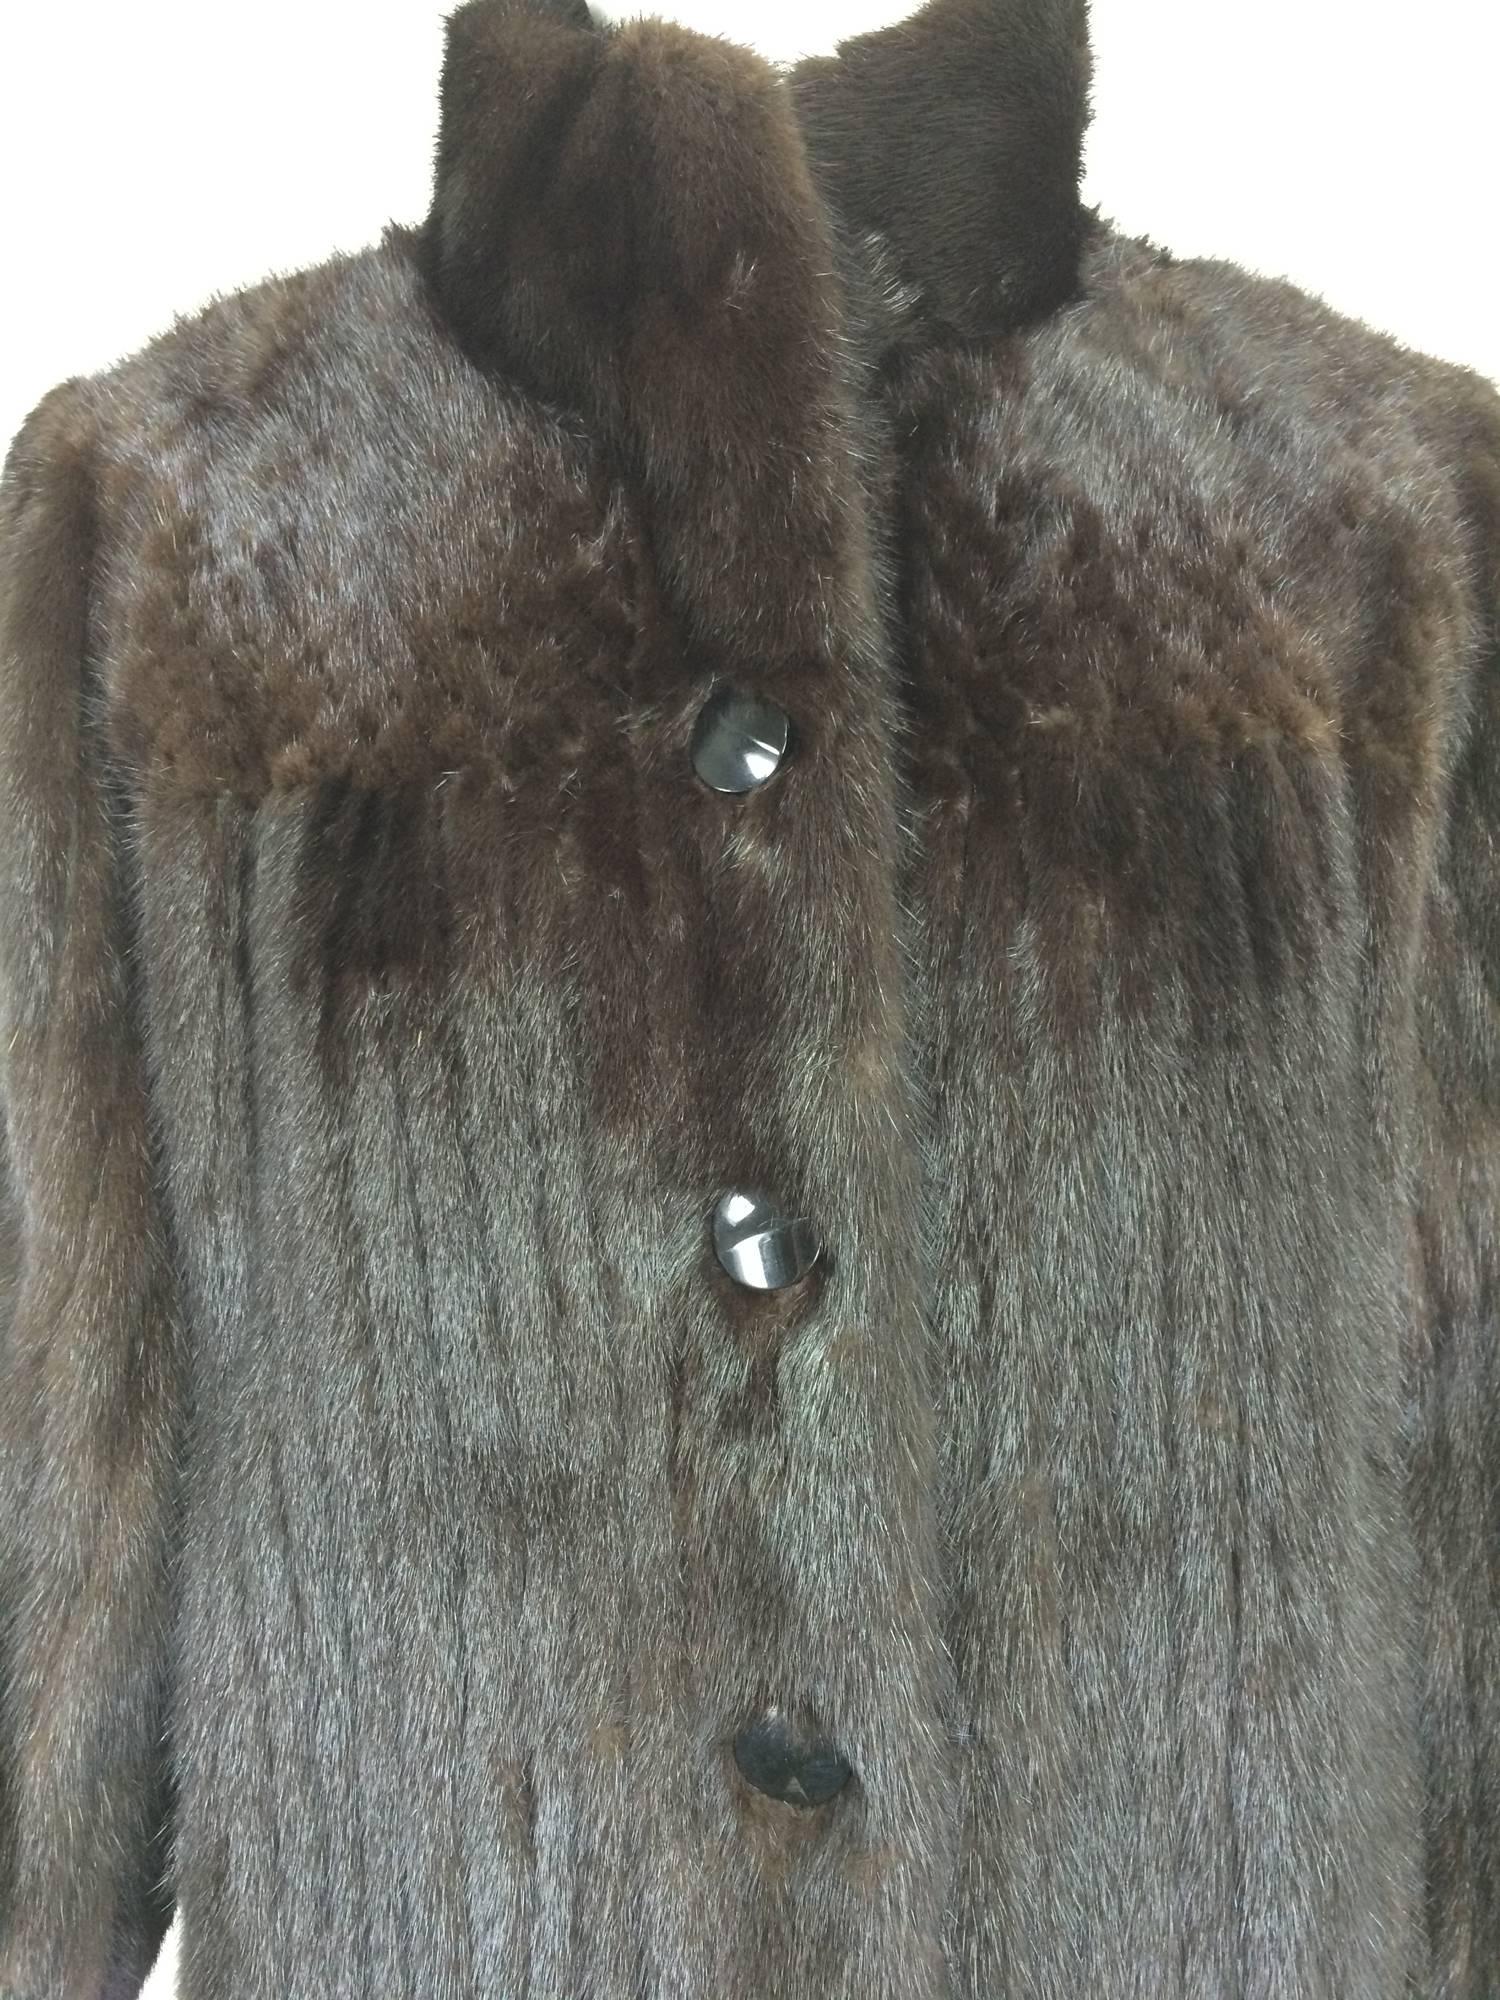 Dark mink fur button cuff, patterend yoke mini coat 1990s...Very dark shiny, almost black mink mini coat or long jacket...The deep pieced mink yoke (front and back) is done in a small X pattern and has a very unusual look, the fur is done in narrow